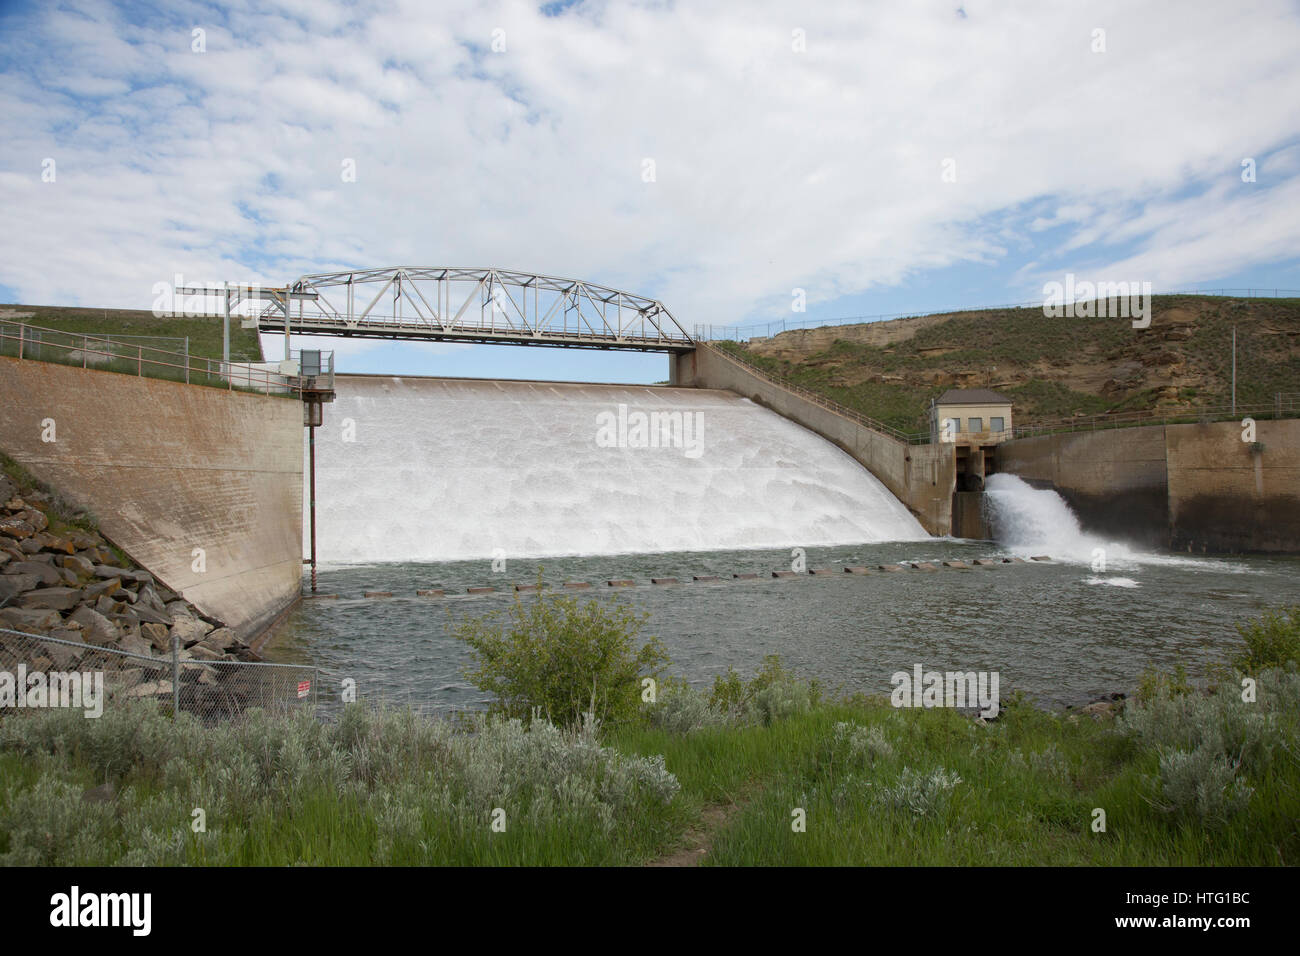 Spillway on Fresno Dam, 14 miles west of Havre. The structure dams the Milk River, providing conservation storage and flood control. Stock Photo